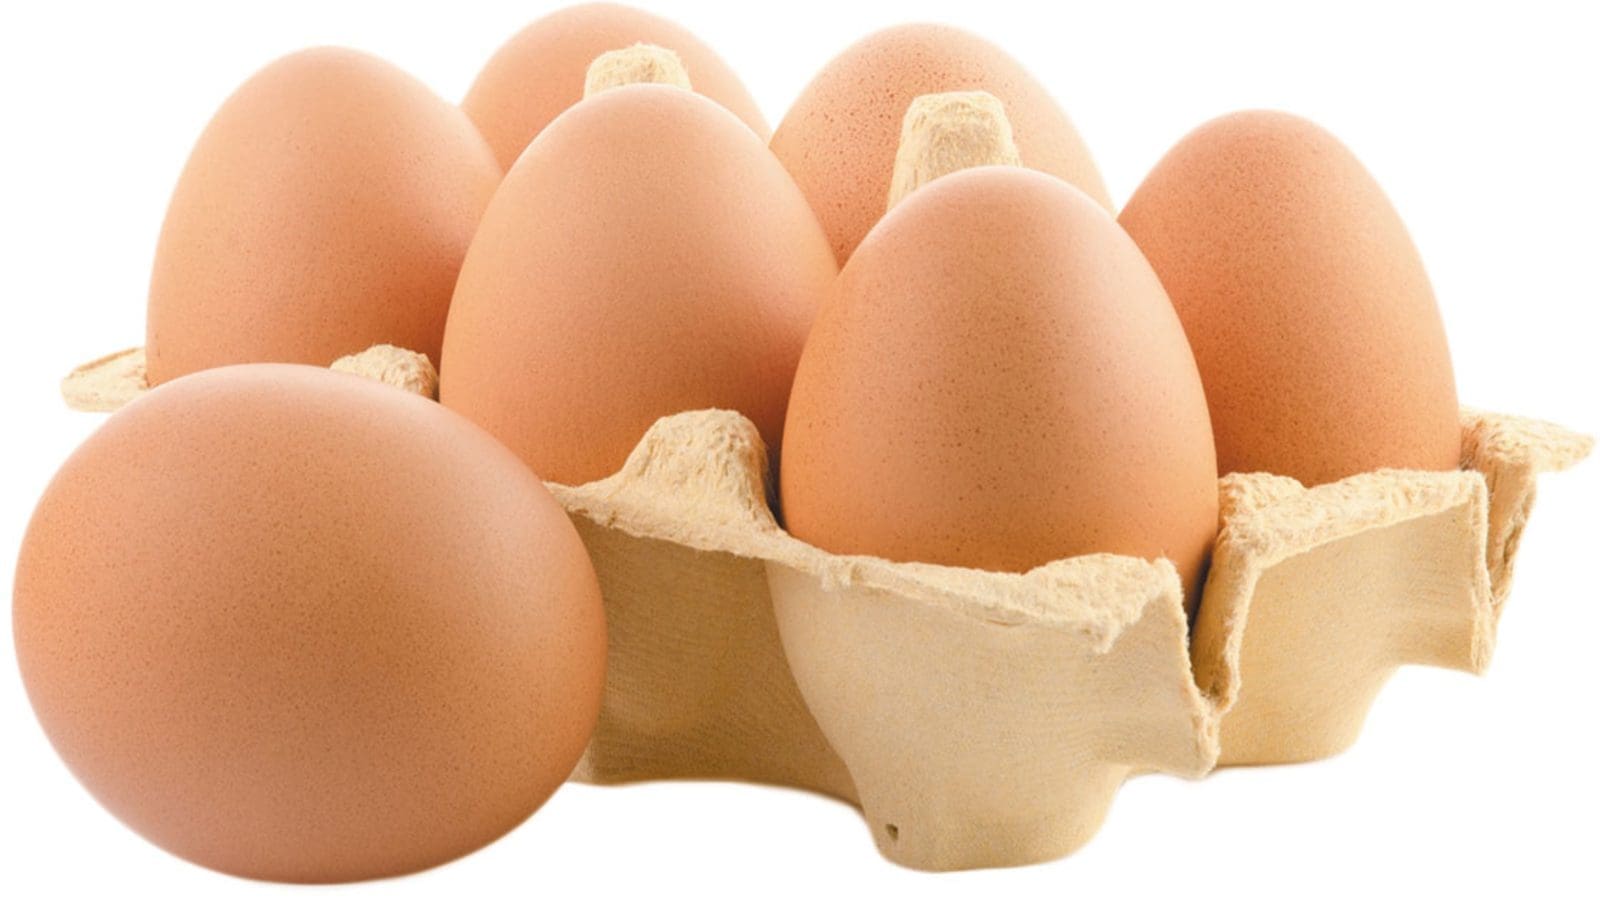 French poultry company LDC  goes for another egg brand owned by Avril Group